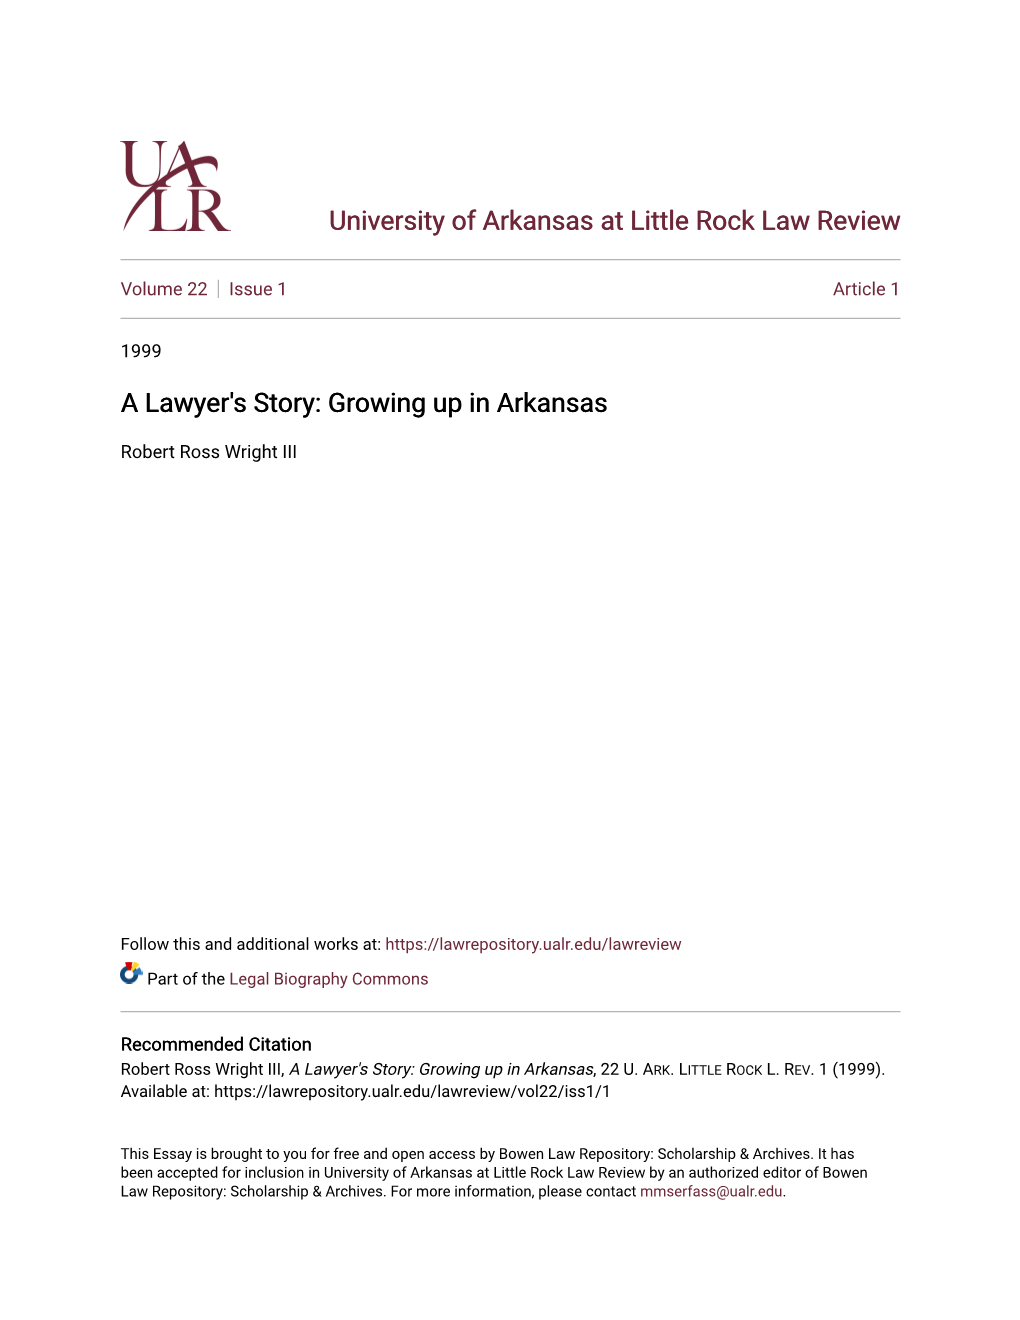 A Lawyer's Story: Growing up in Arkansas